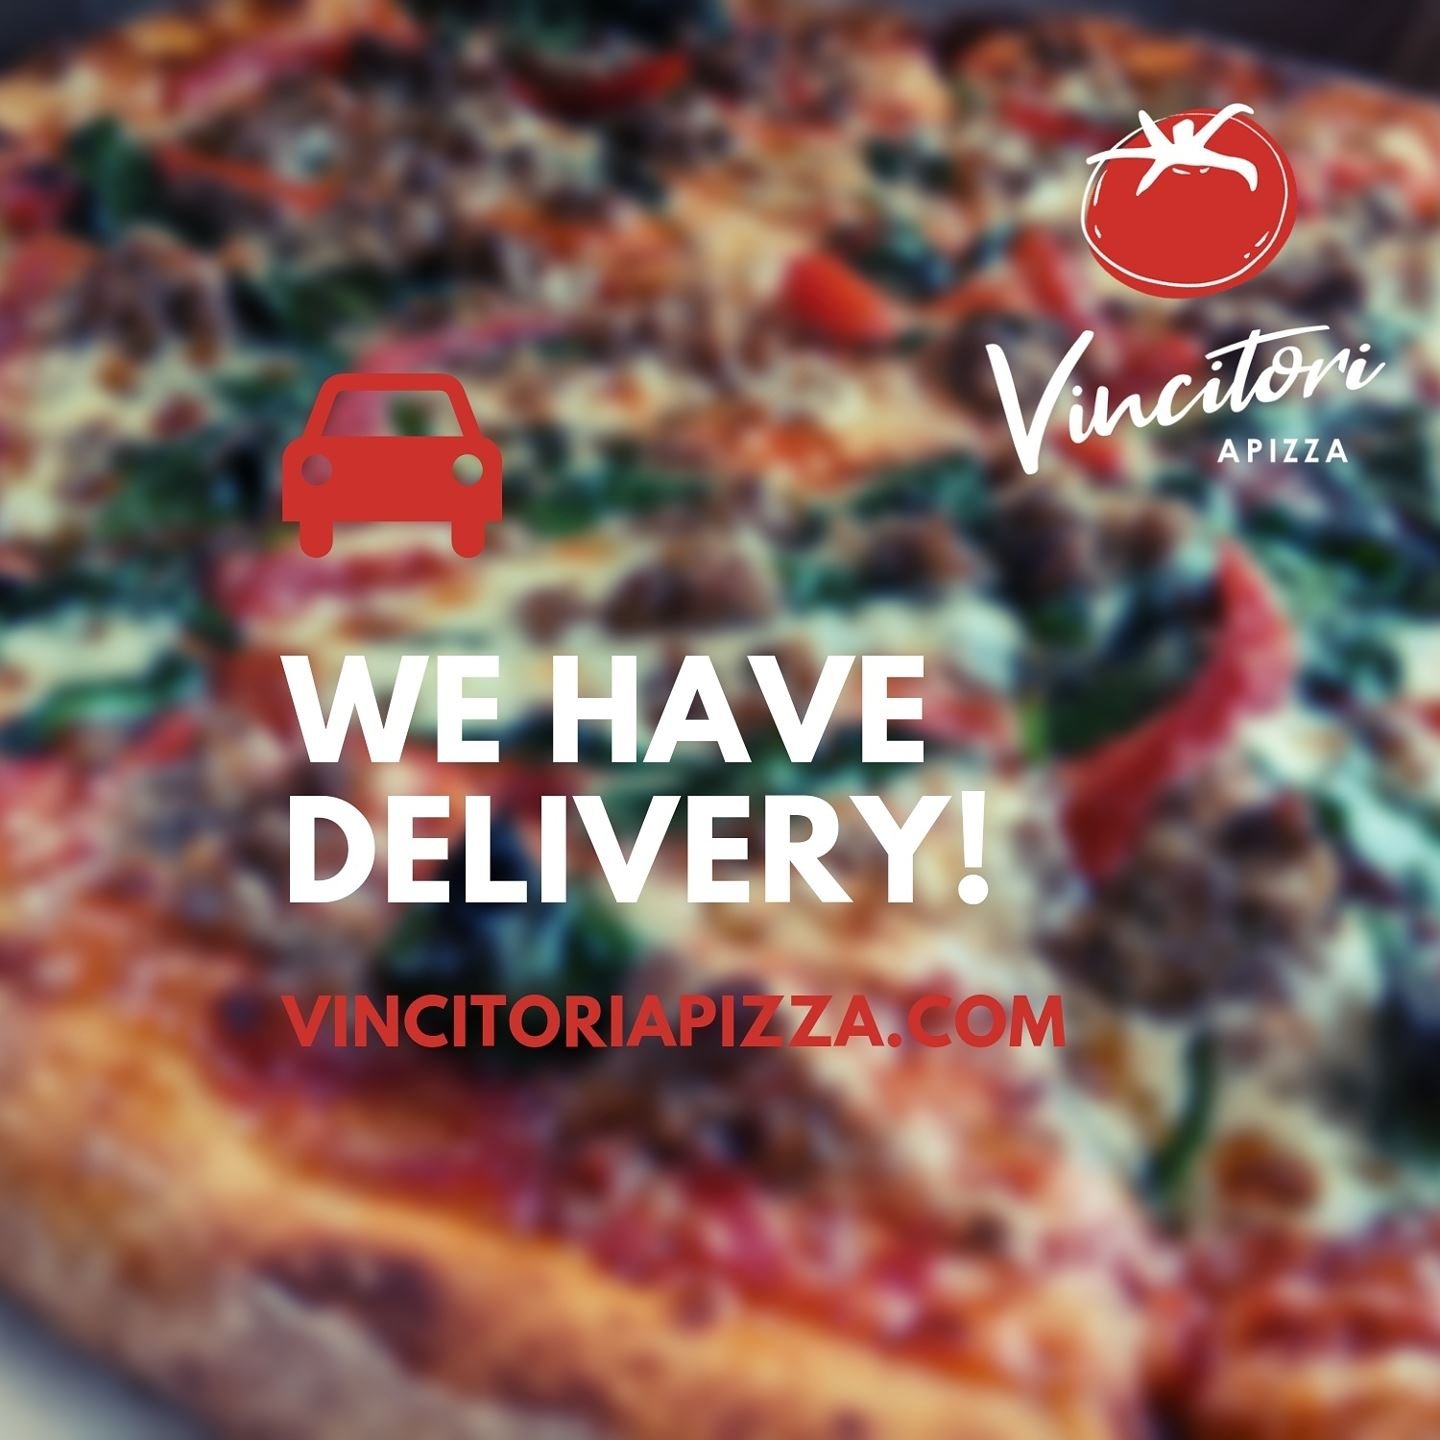 You don't even have to leave your couch tonight. We offer delivery with our partner @shorelinemenus!

Full menu available, including specials! Just visit our website VincitoriApizza.com and click the delivery option.

#ctdelivery #deliveryavailable #